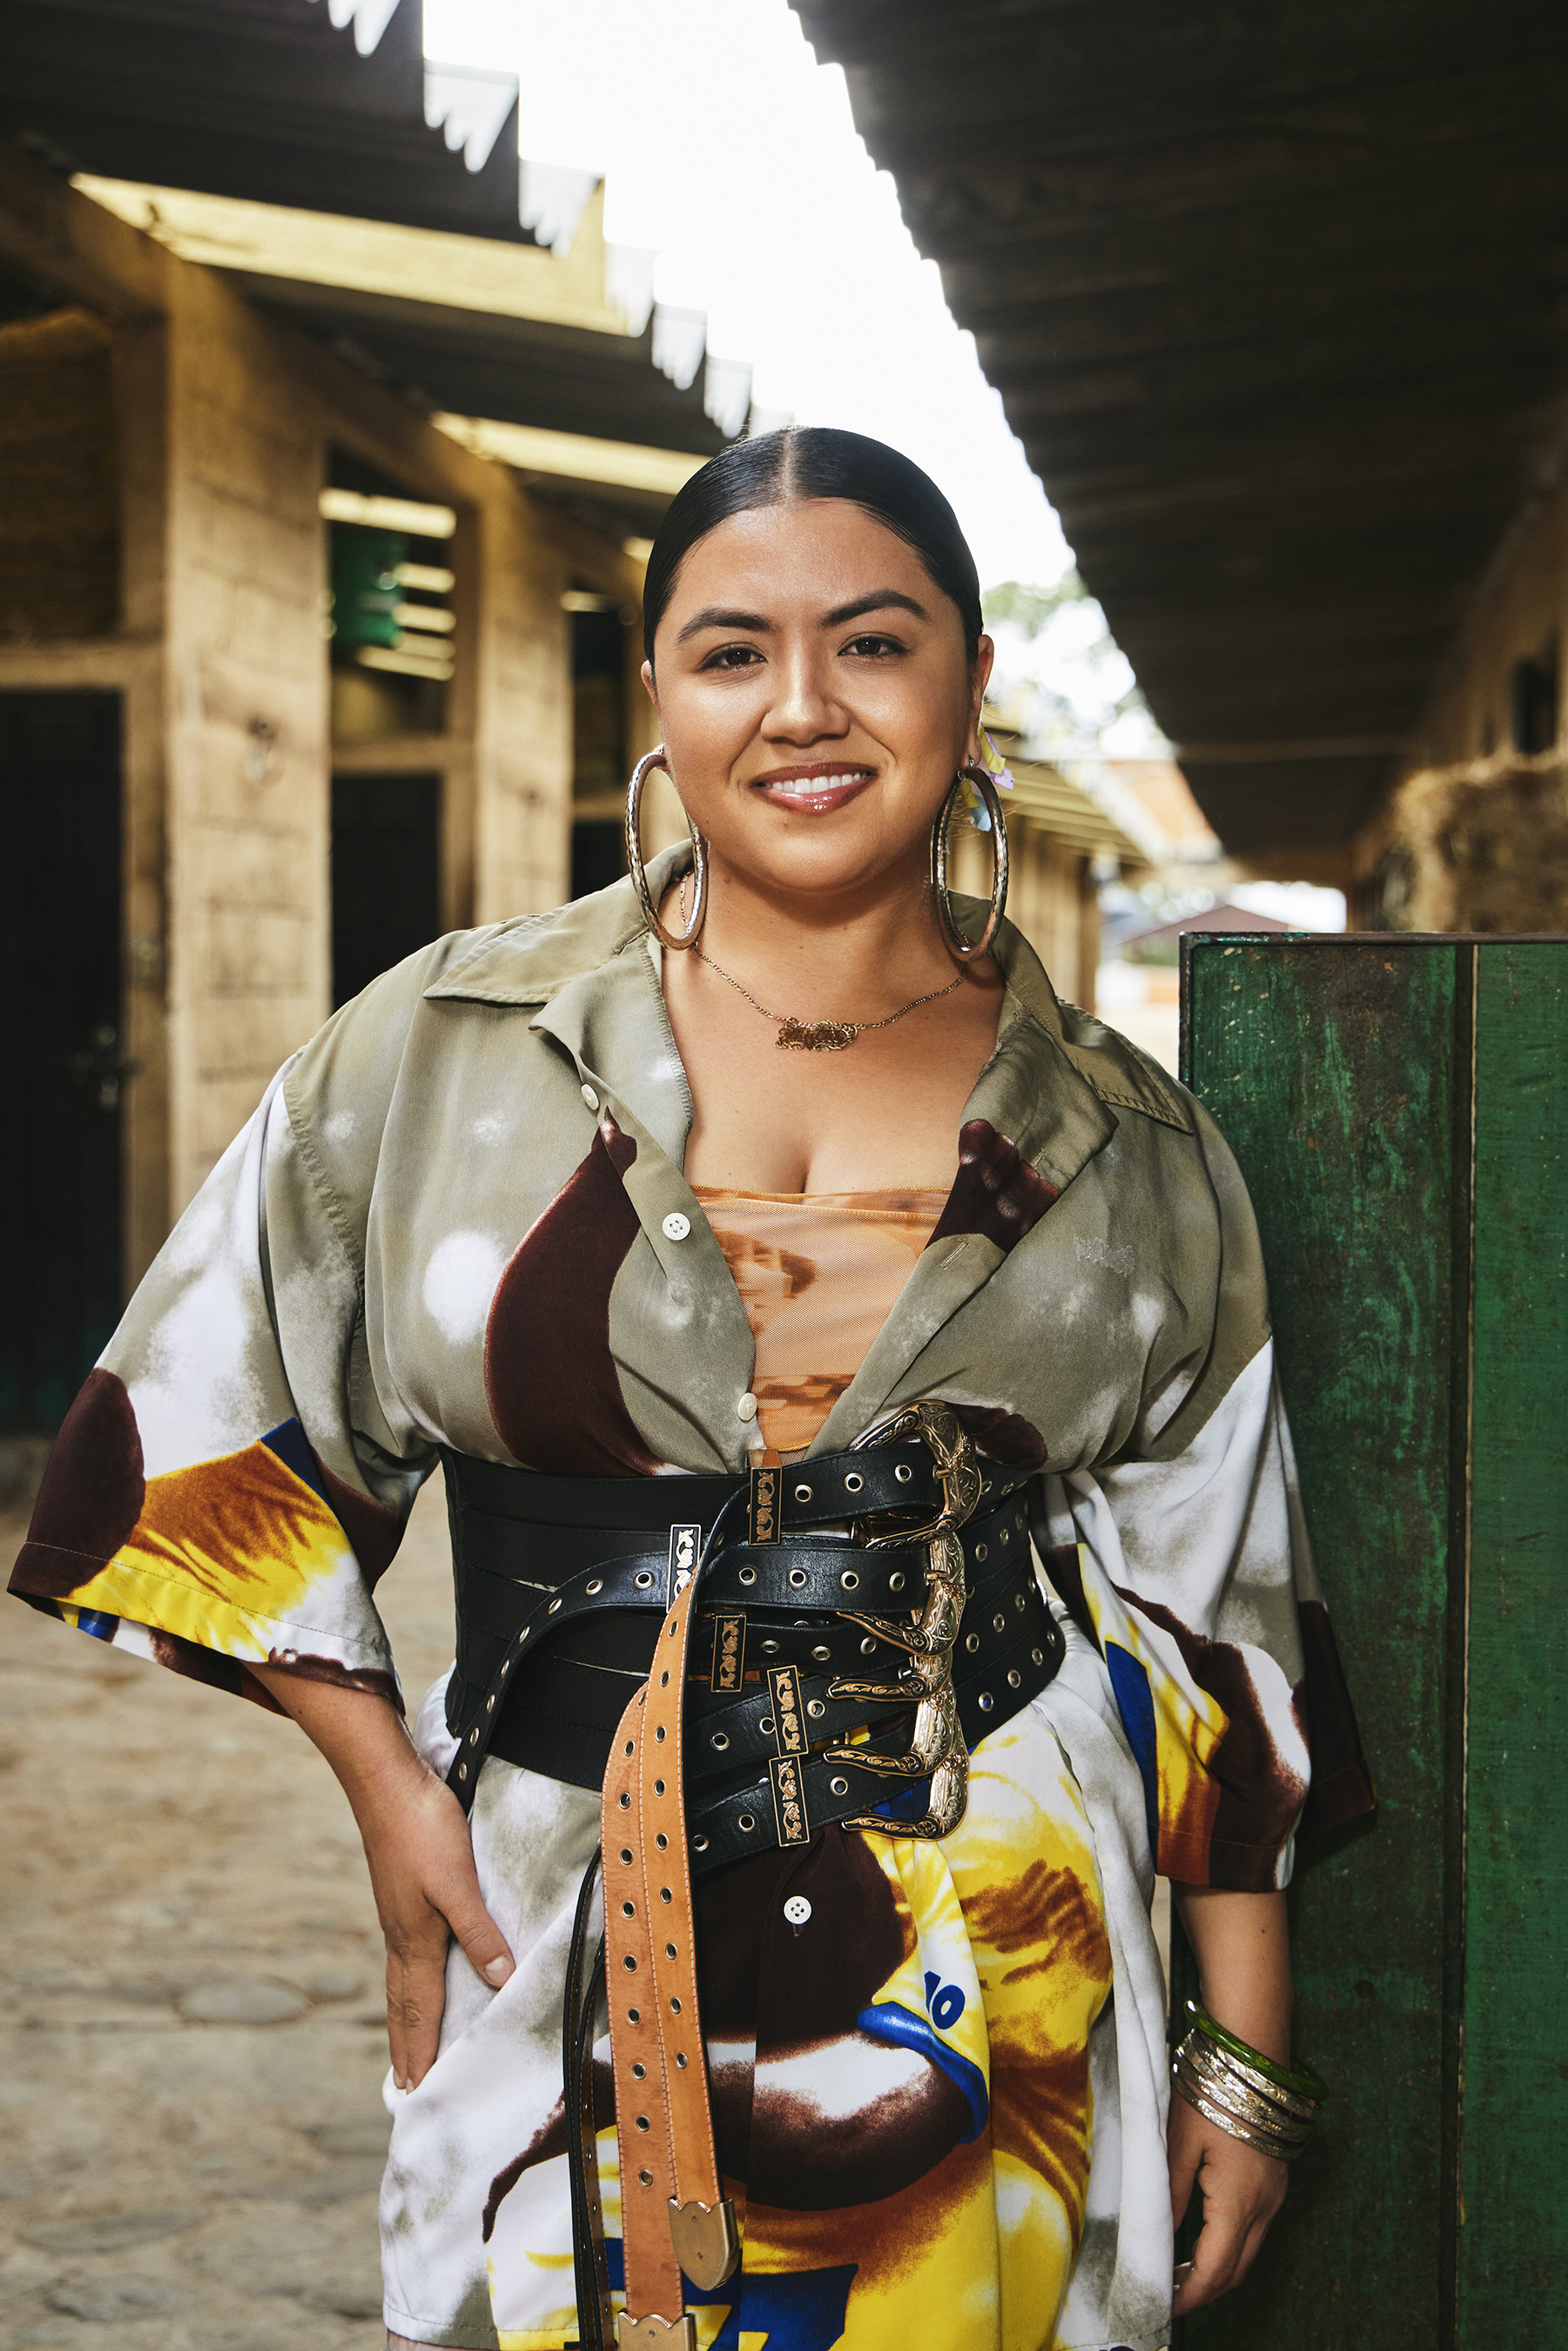 Mexican-American Photographer, Thalia Gochez captured stills that represent the magnificent culture of Mexico for the stunning OOH campaign